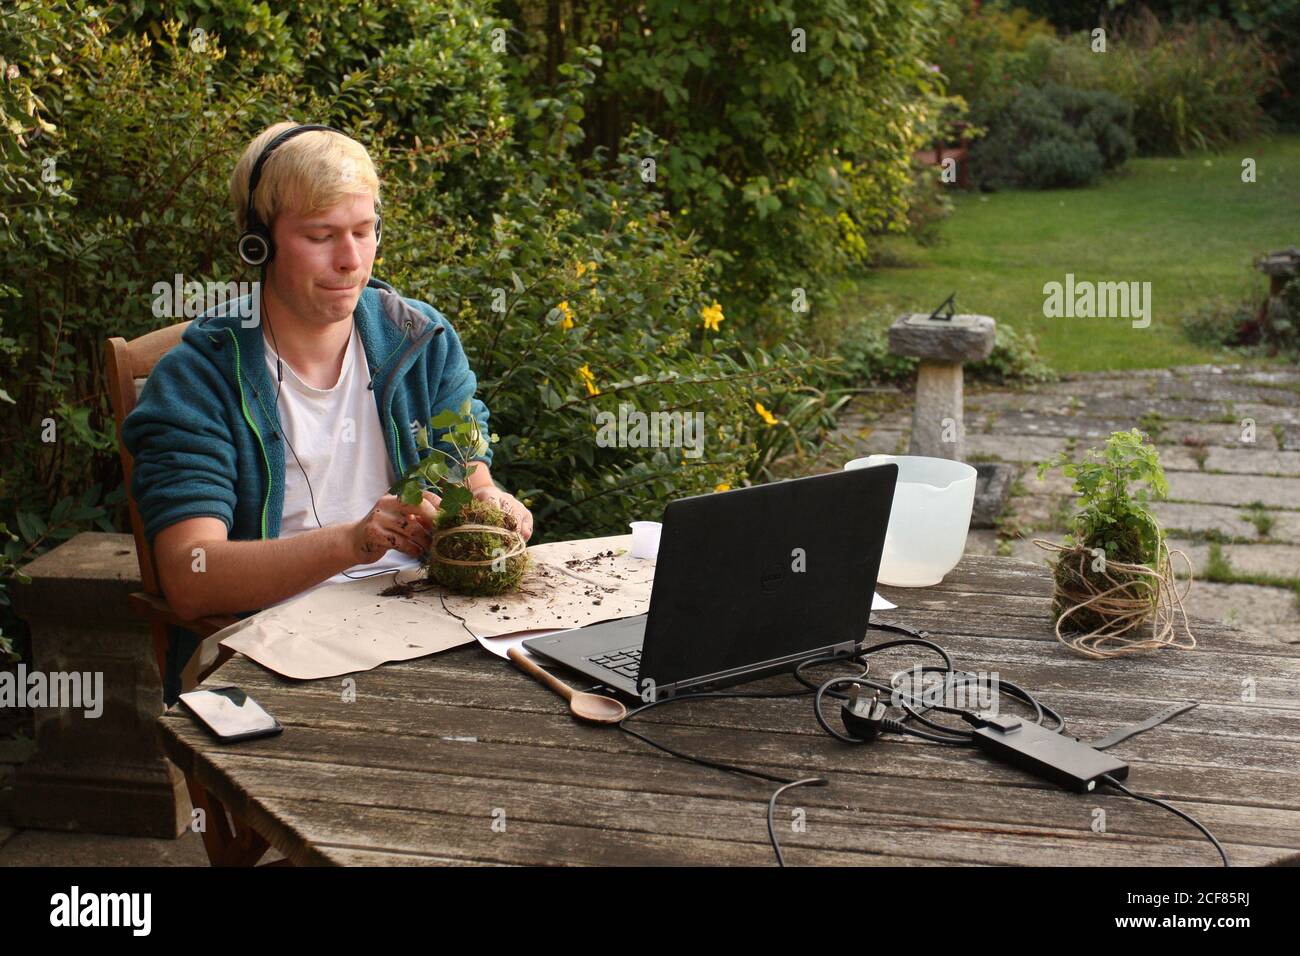 Millennial generation young man sitting outside with computer making plant hanging basket Stock Photo